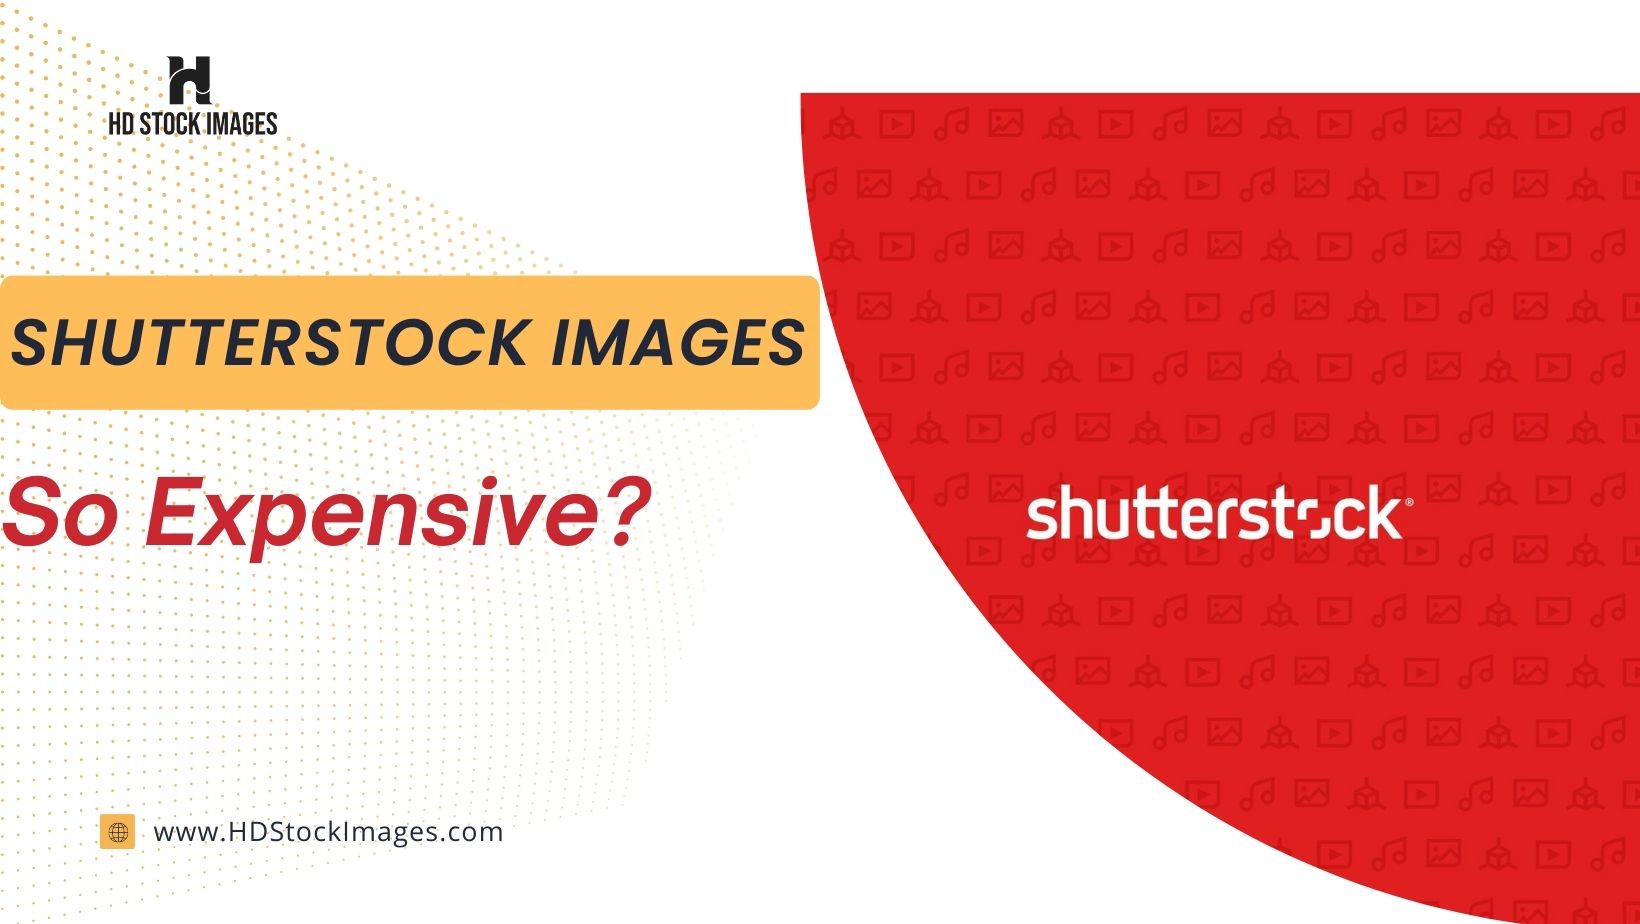 an image of Why Are Shutterstock Images So Expensive? Factors Affecting Pricing and Value